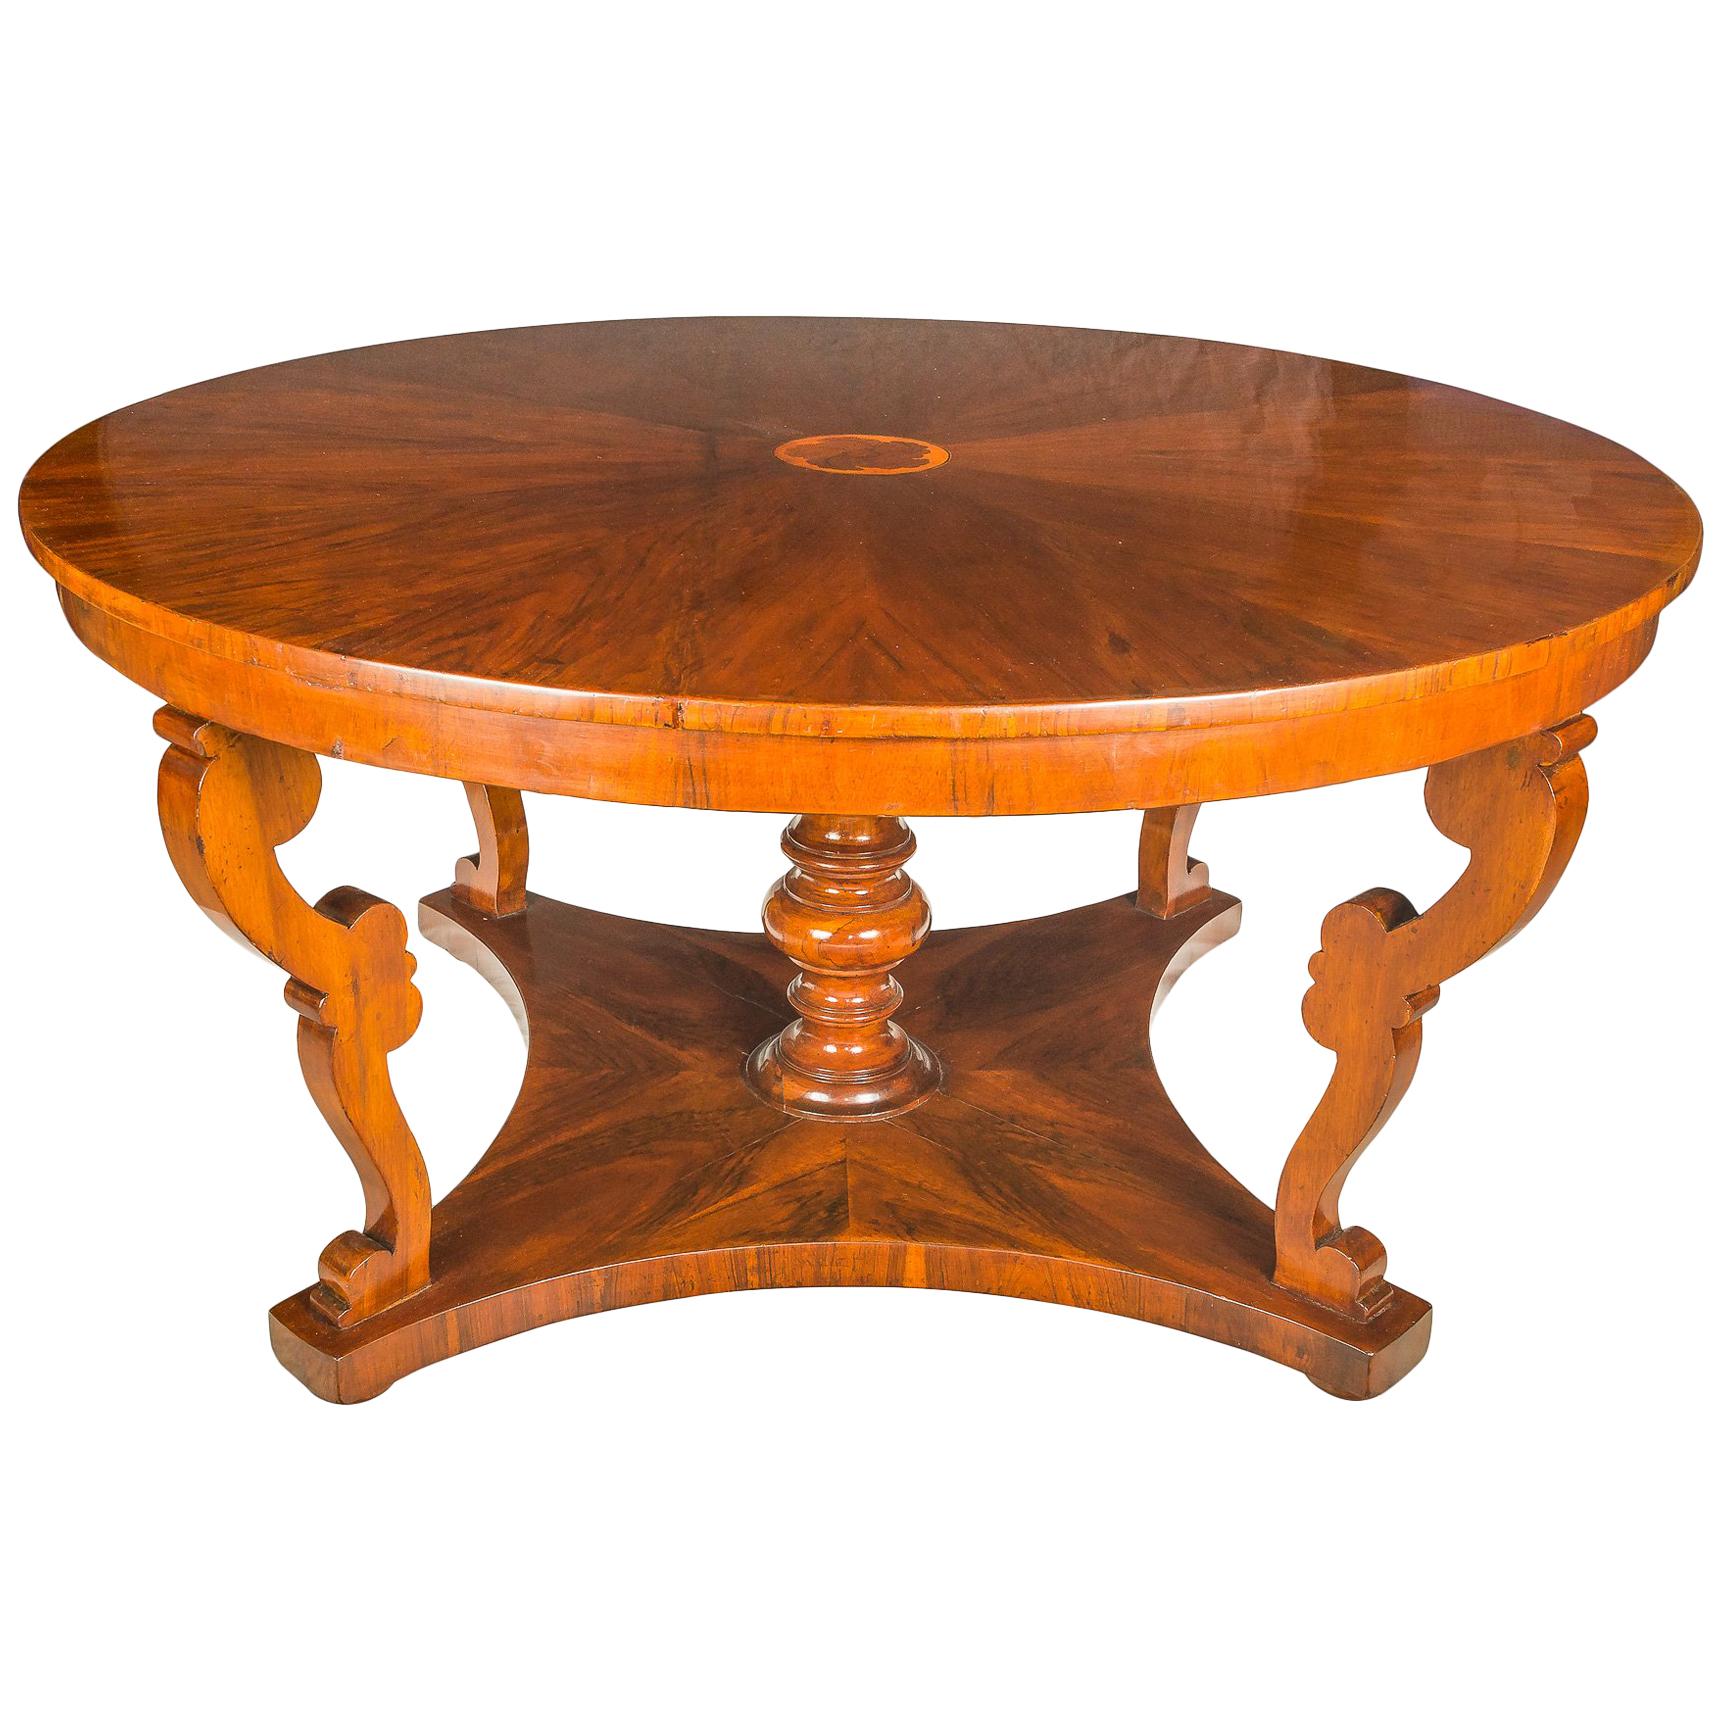 Italian Round Dining Table, Italy 19th Century Inlaid Wood Charles X Biedermeier For Sale